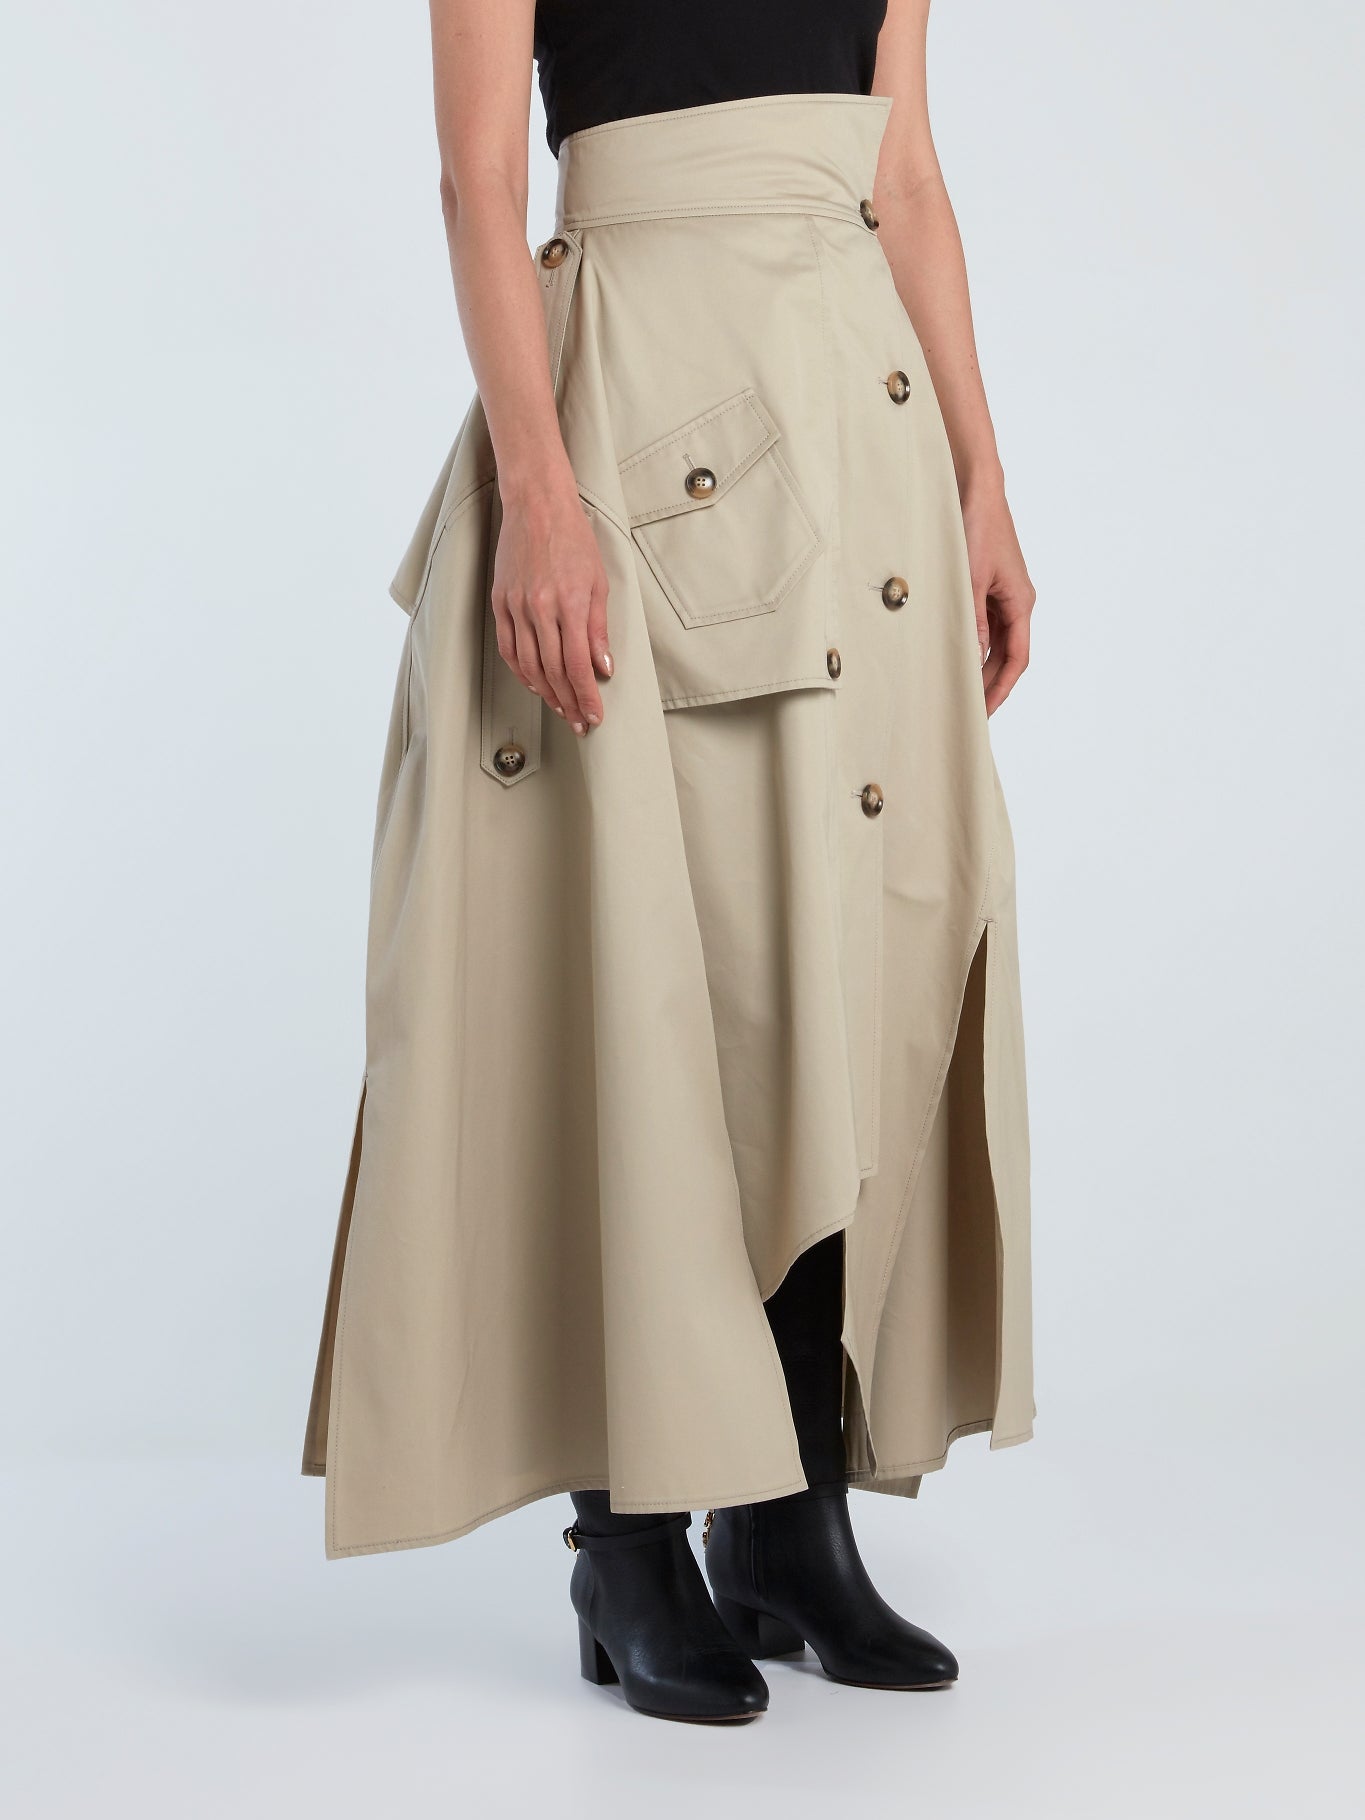 Trench Store Skirt Global Maison-B-More Maxi Form – Reconstructed